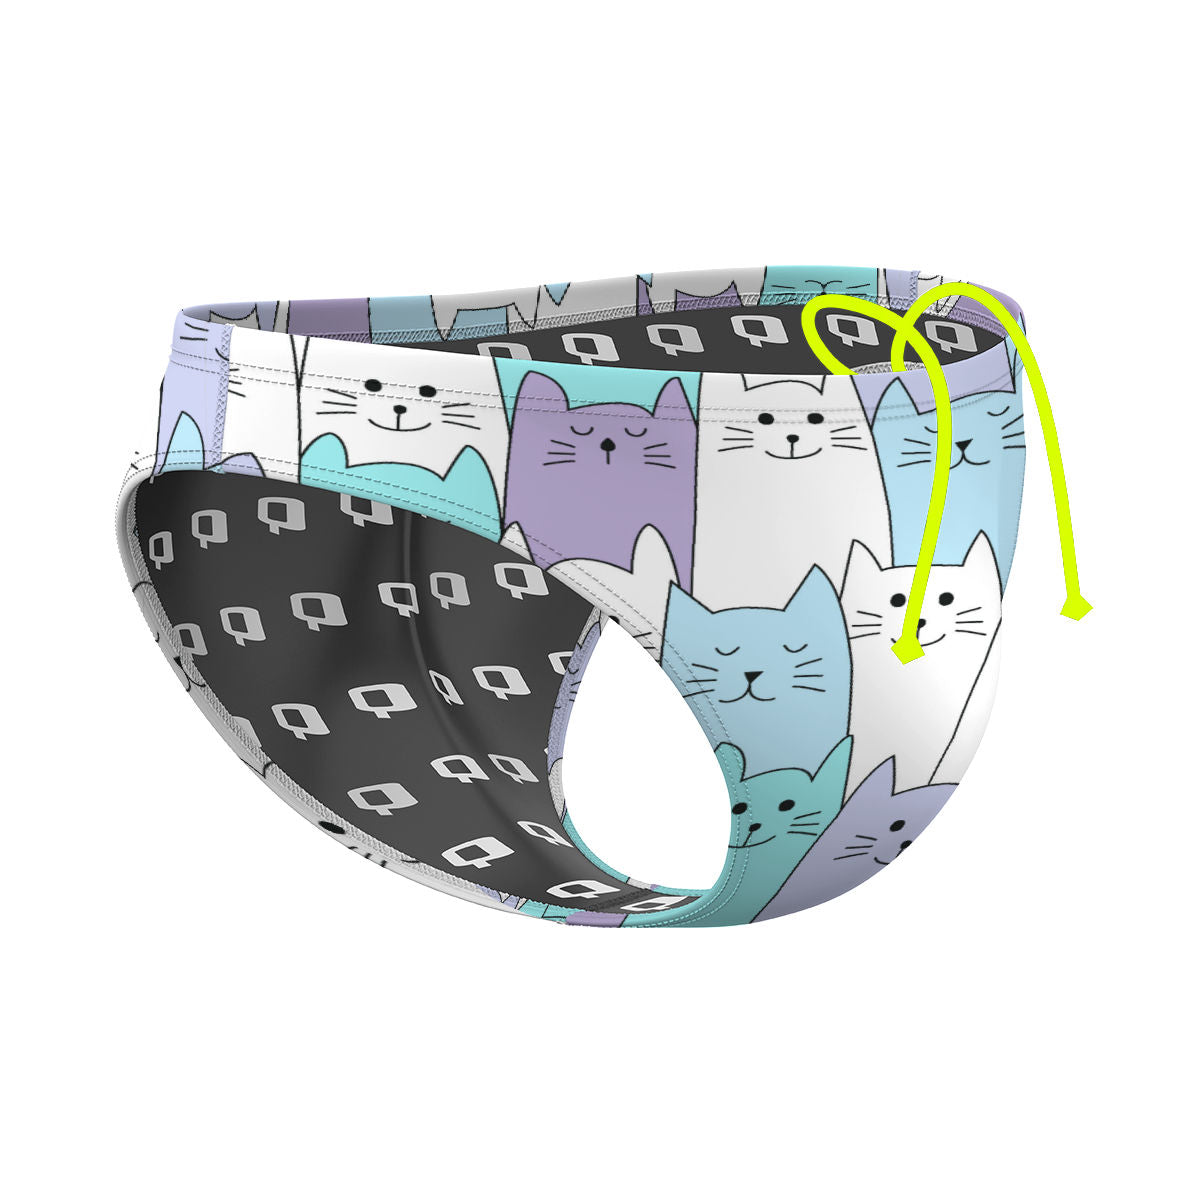 Cats - Waterpolo Brief Swimsuit